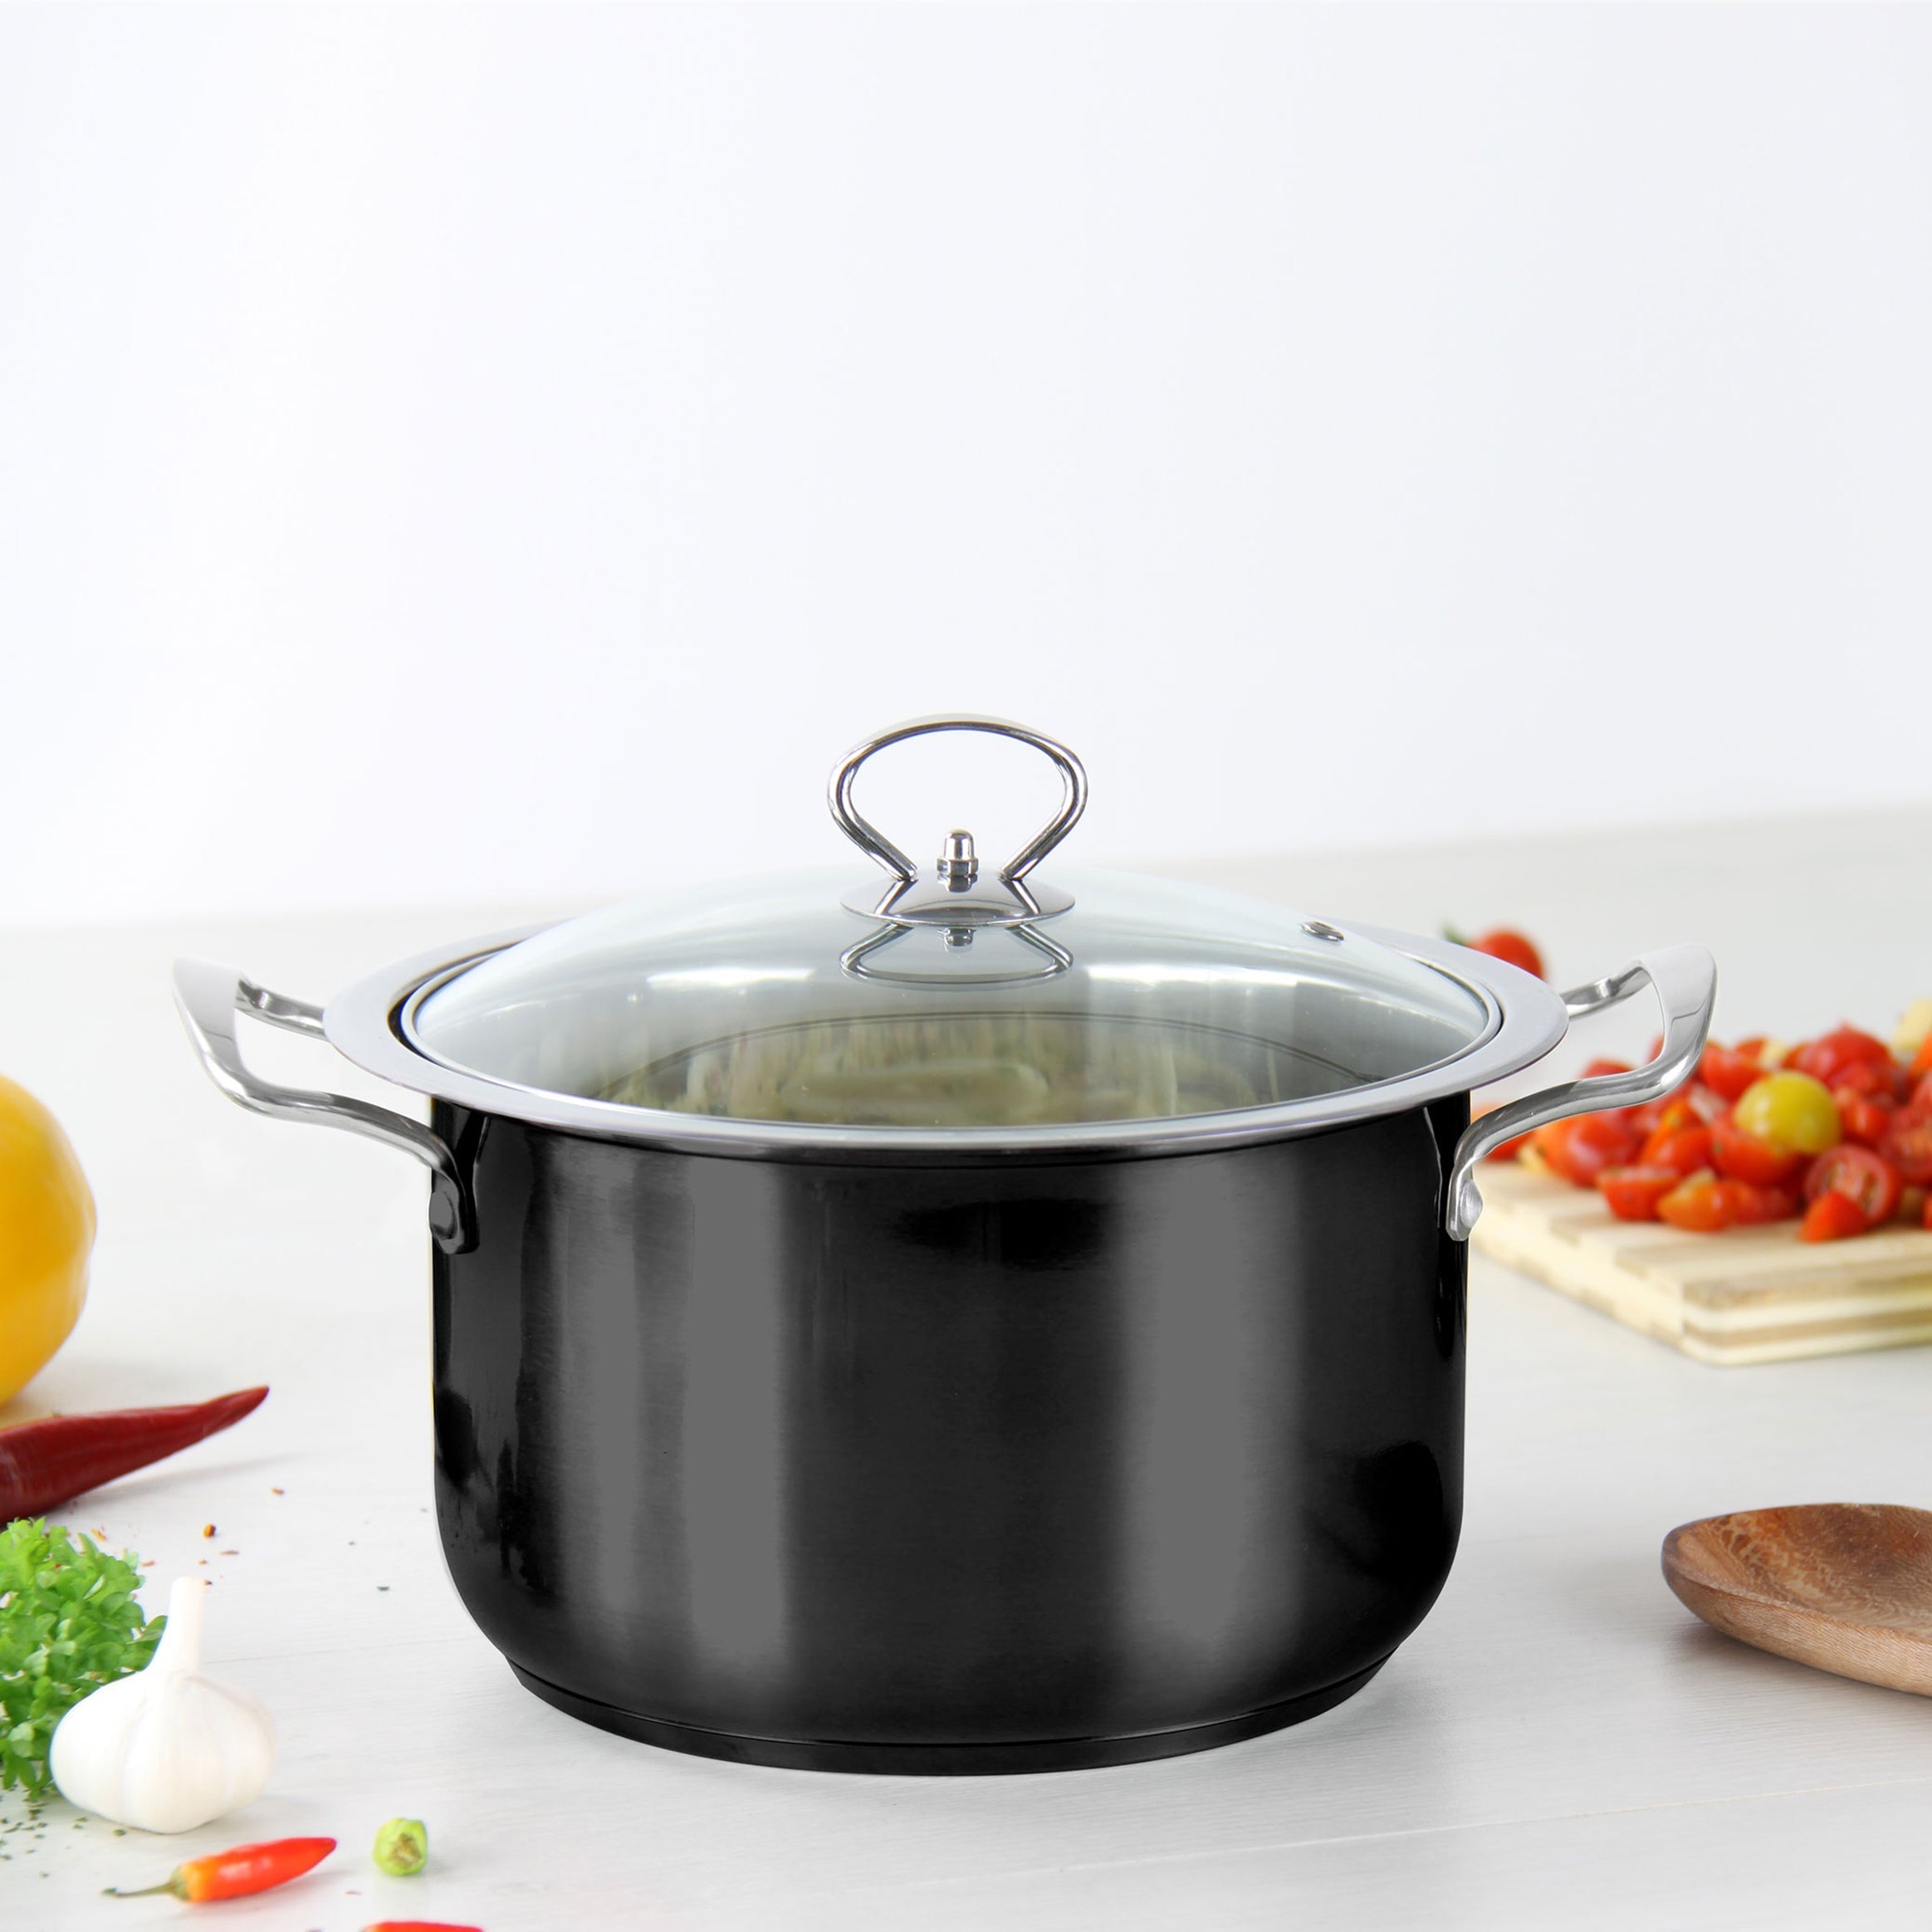 Stainless Steel Stockpot - Induction Base - ONYX - 22cm